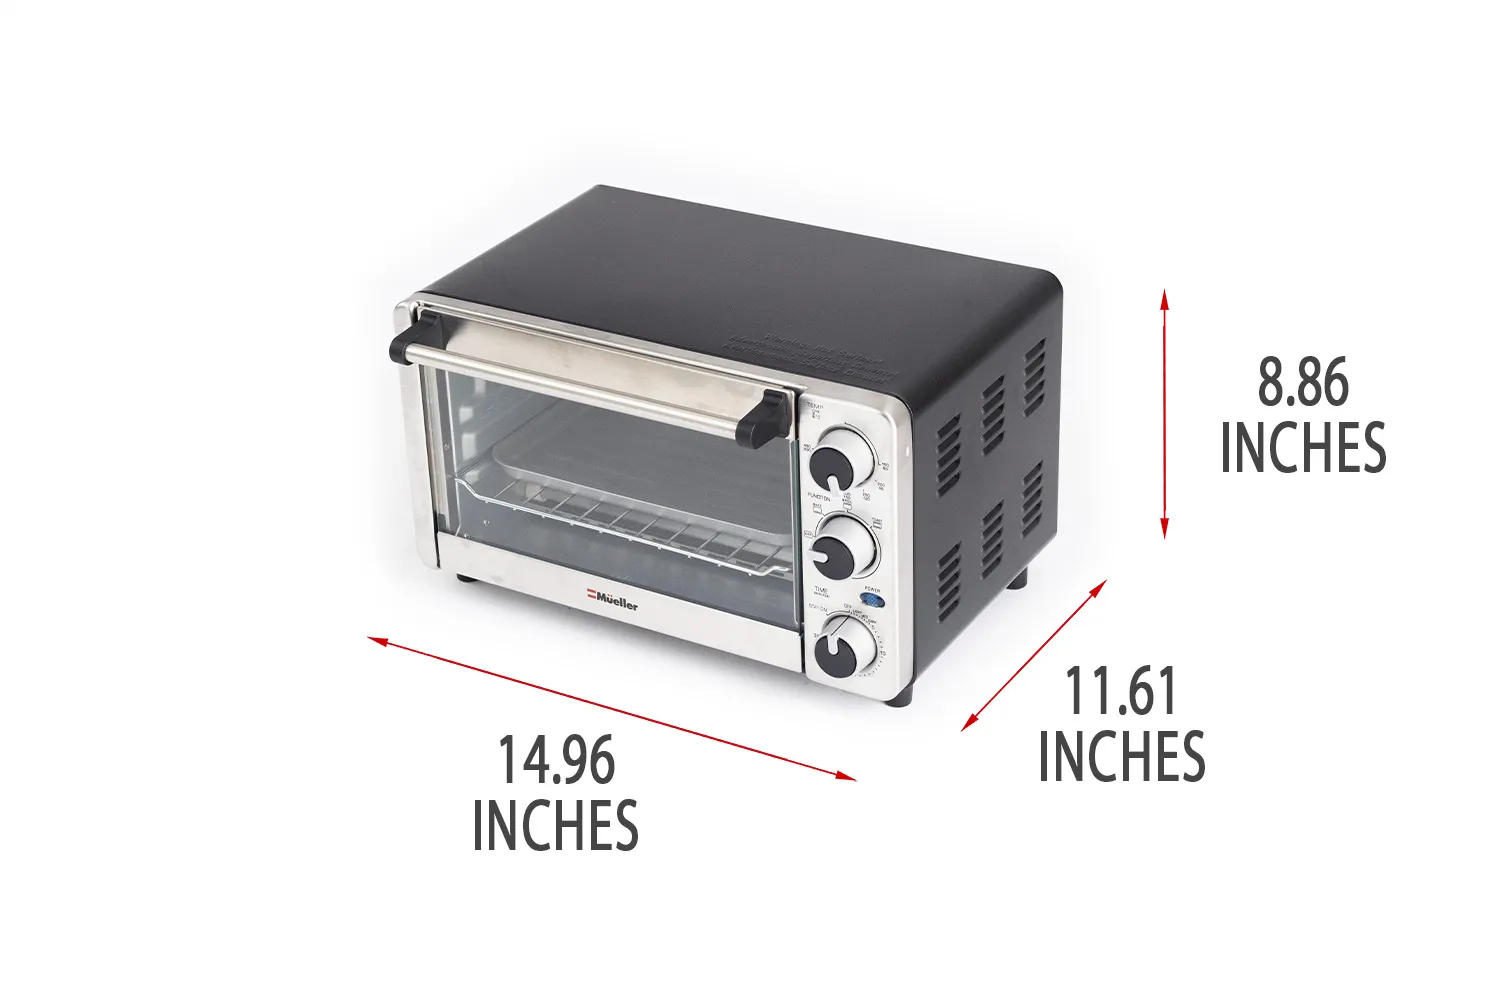 Mueller Austria Toaster Oven Review 